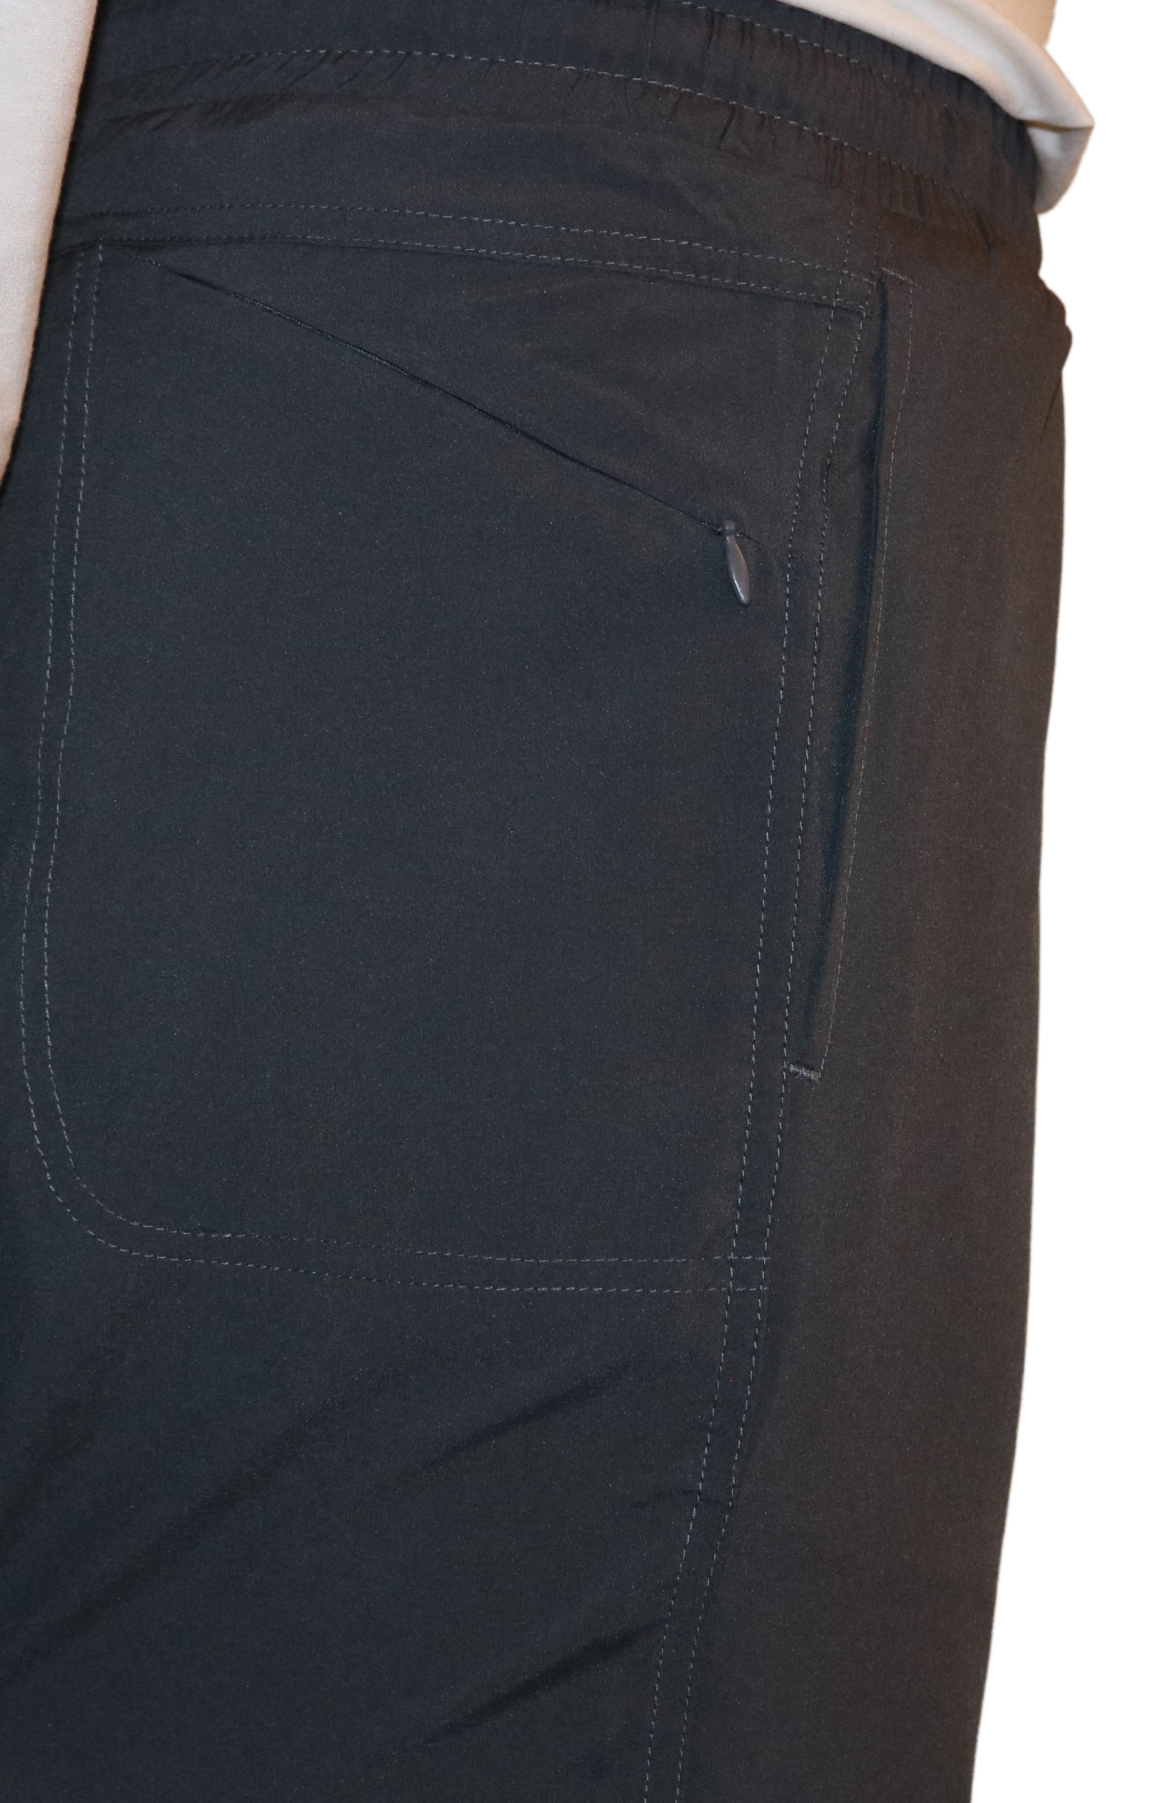 Back pocket of the Bamboo Lined Sabalo Fishing Shorts. These fishing shorts are perfect for long days on the water.